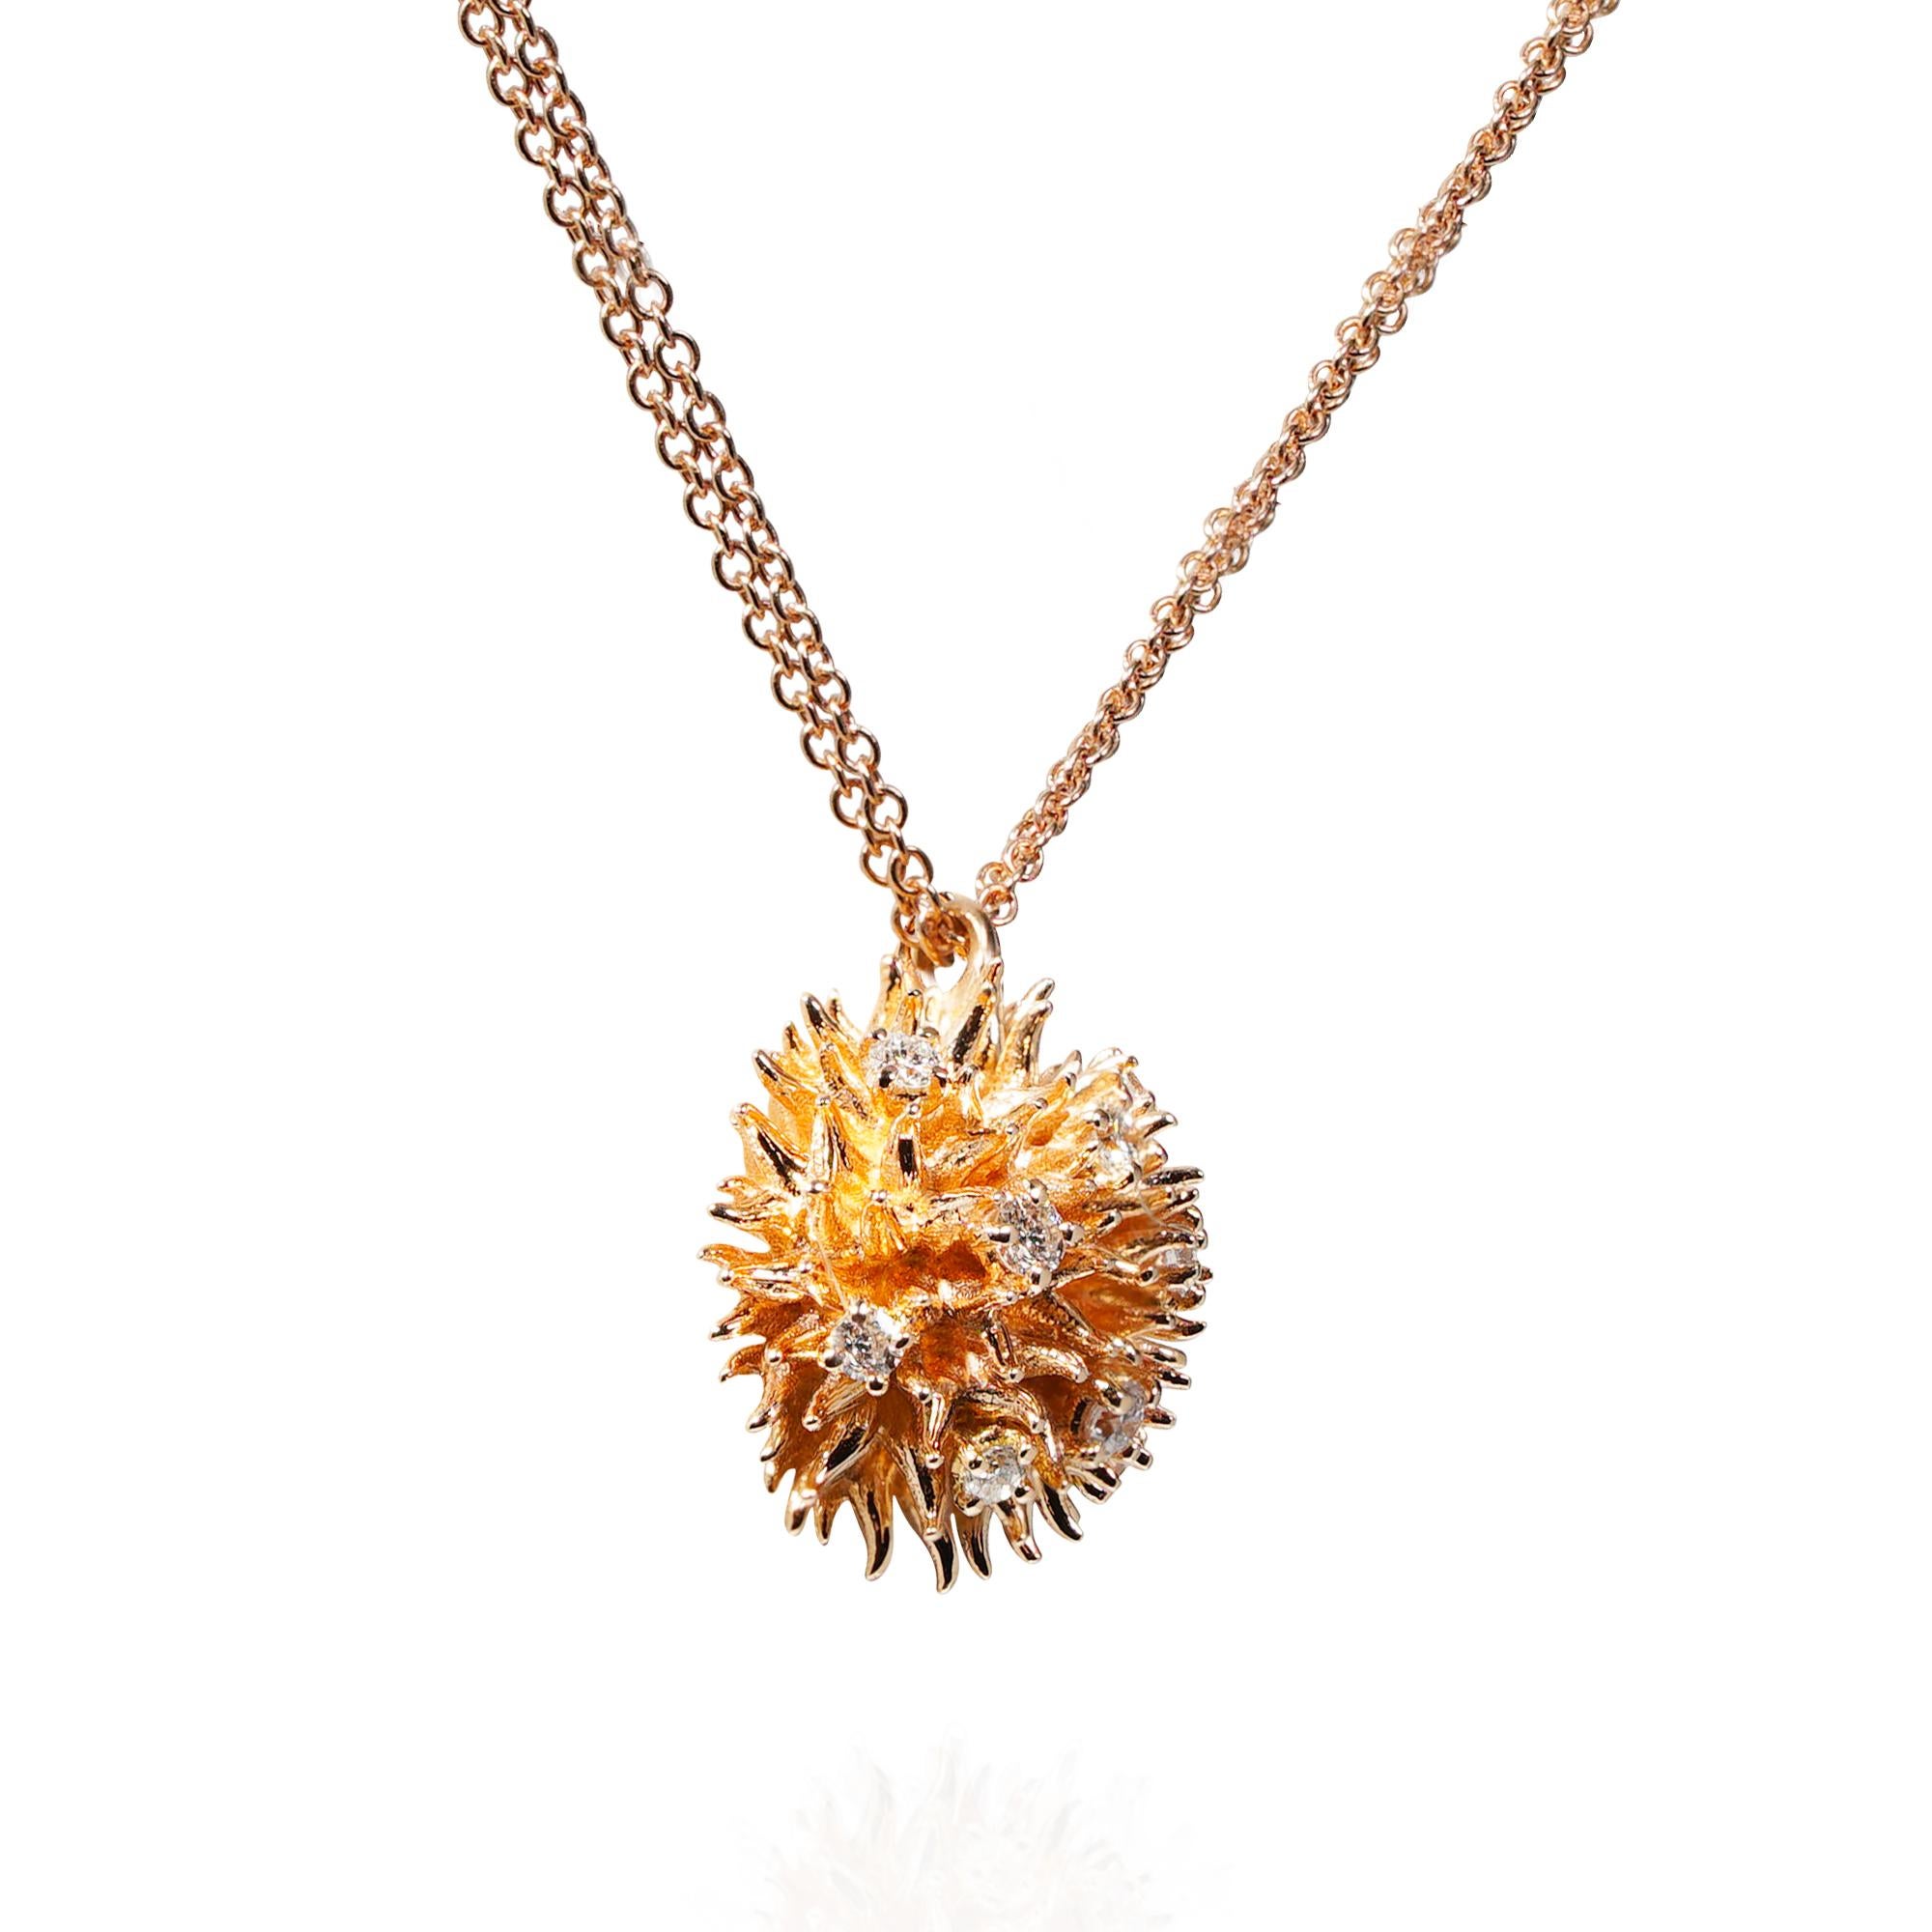 Pendant created in rose gold 18k with diamonds, from Ricci collection. 

